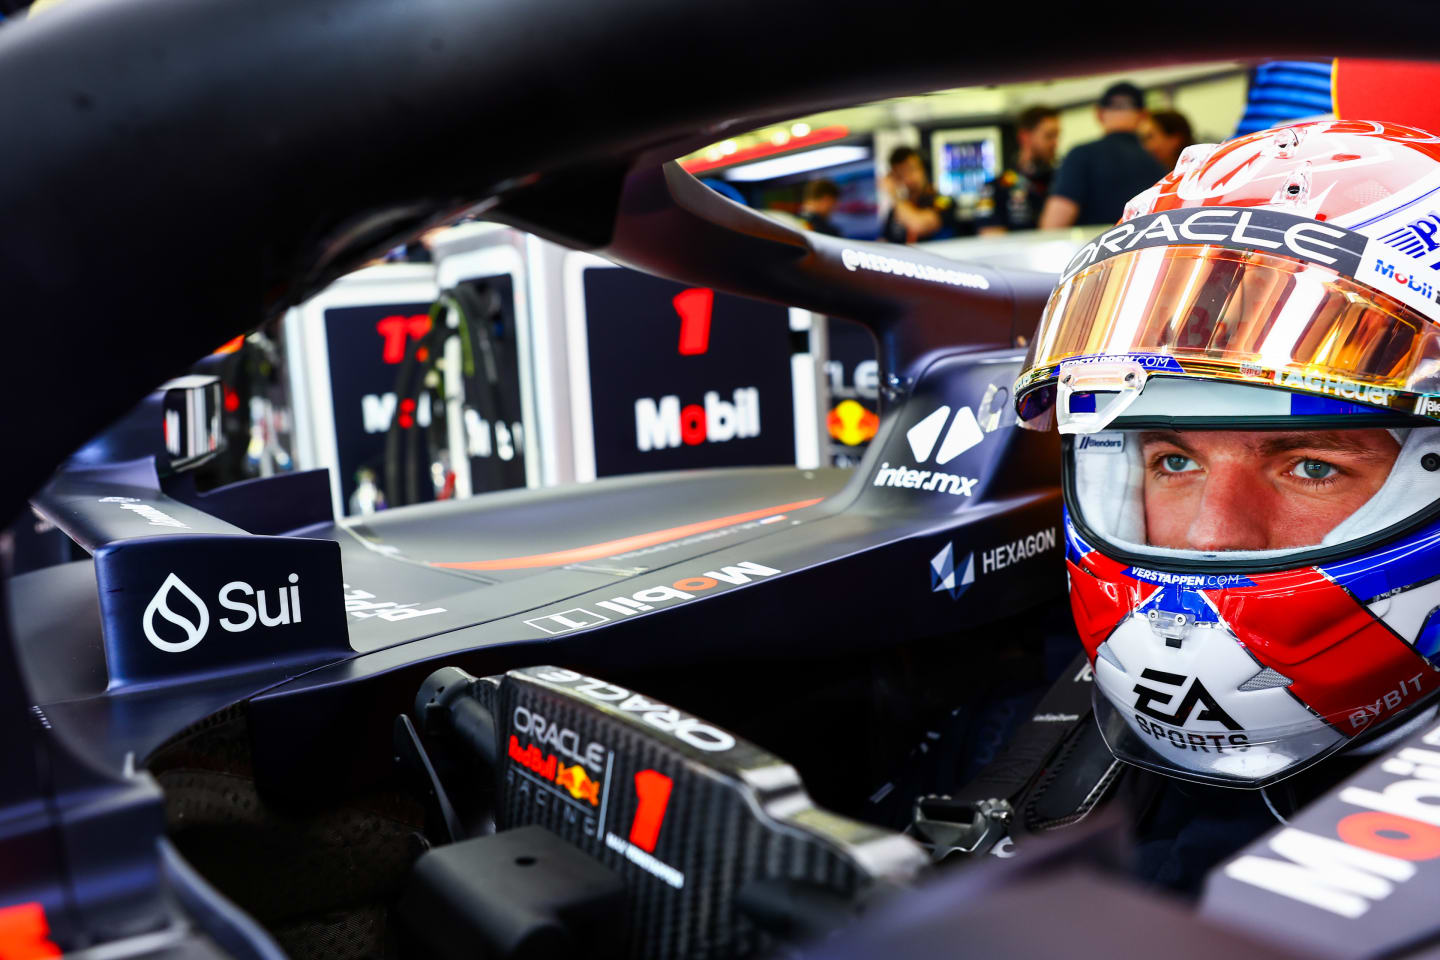 BAHRAIN, BAHRAIN - FEBRUARY 29: Max Verstappen of the Netherlands and Oracle Red Bull Racing prepares to drive in the garage during practice ahead of the F1 Grand Prix of Bahrain at Bahrain International Circuit on February 29, 2024 in Bahrain, Bahrain. (Photo by Mark Thompson/Getty Images)